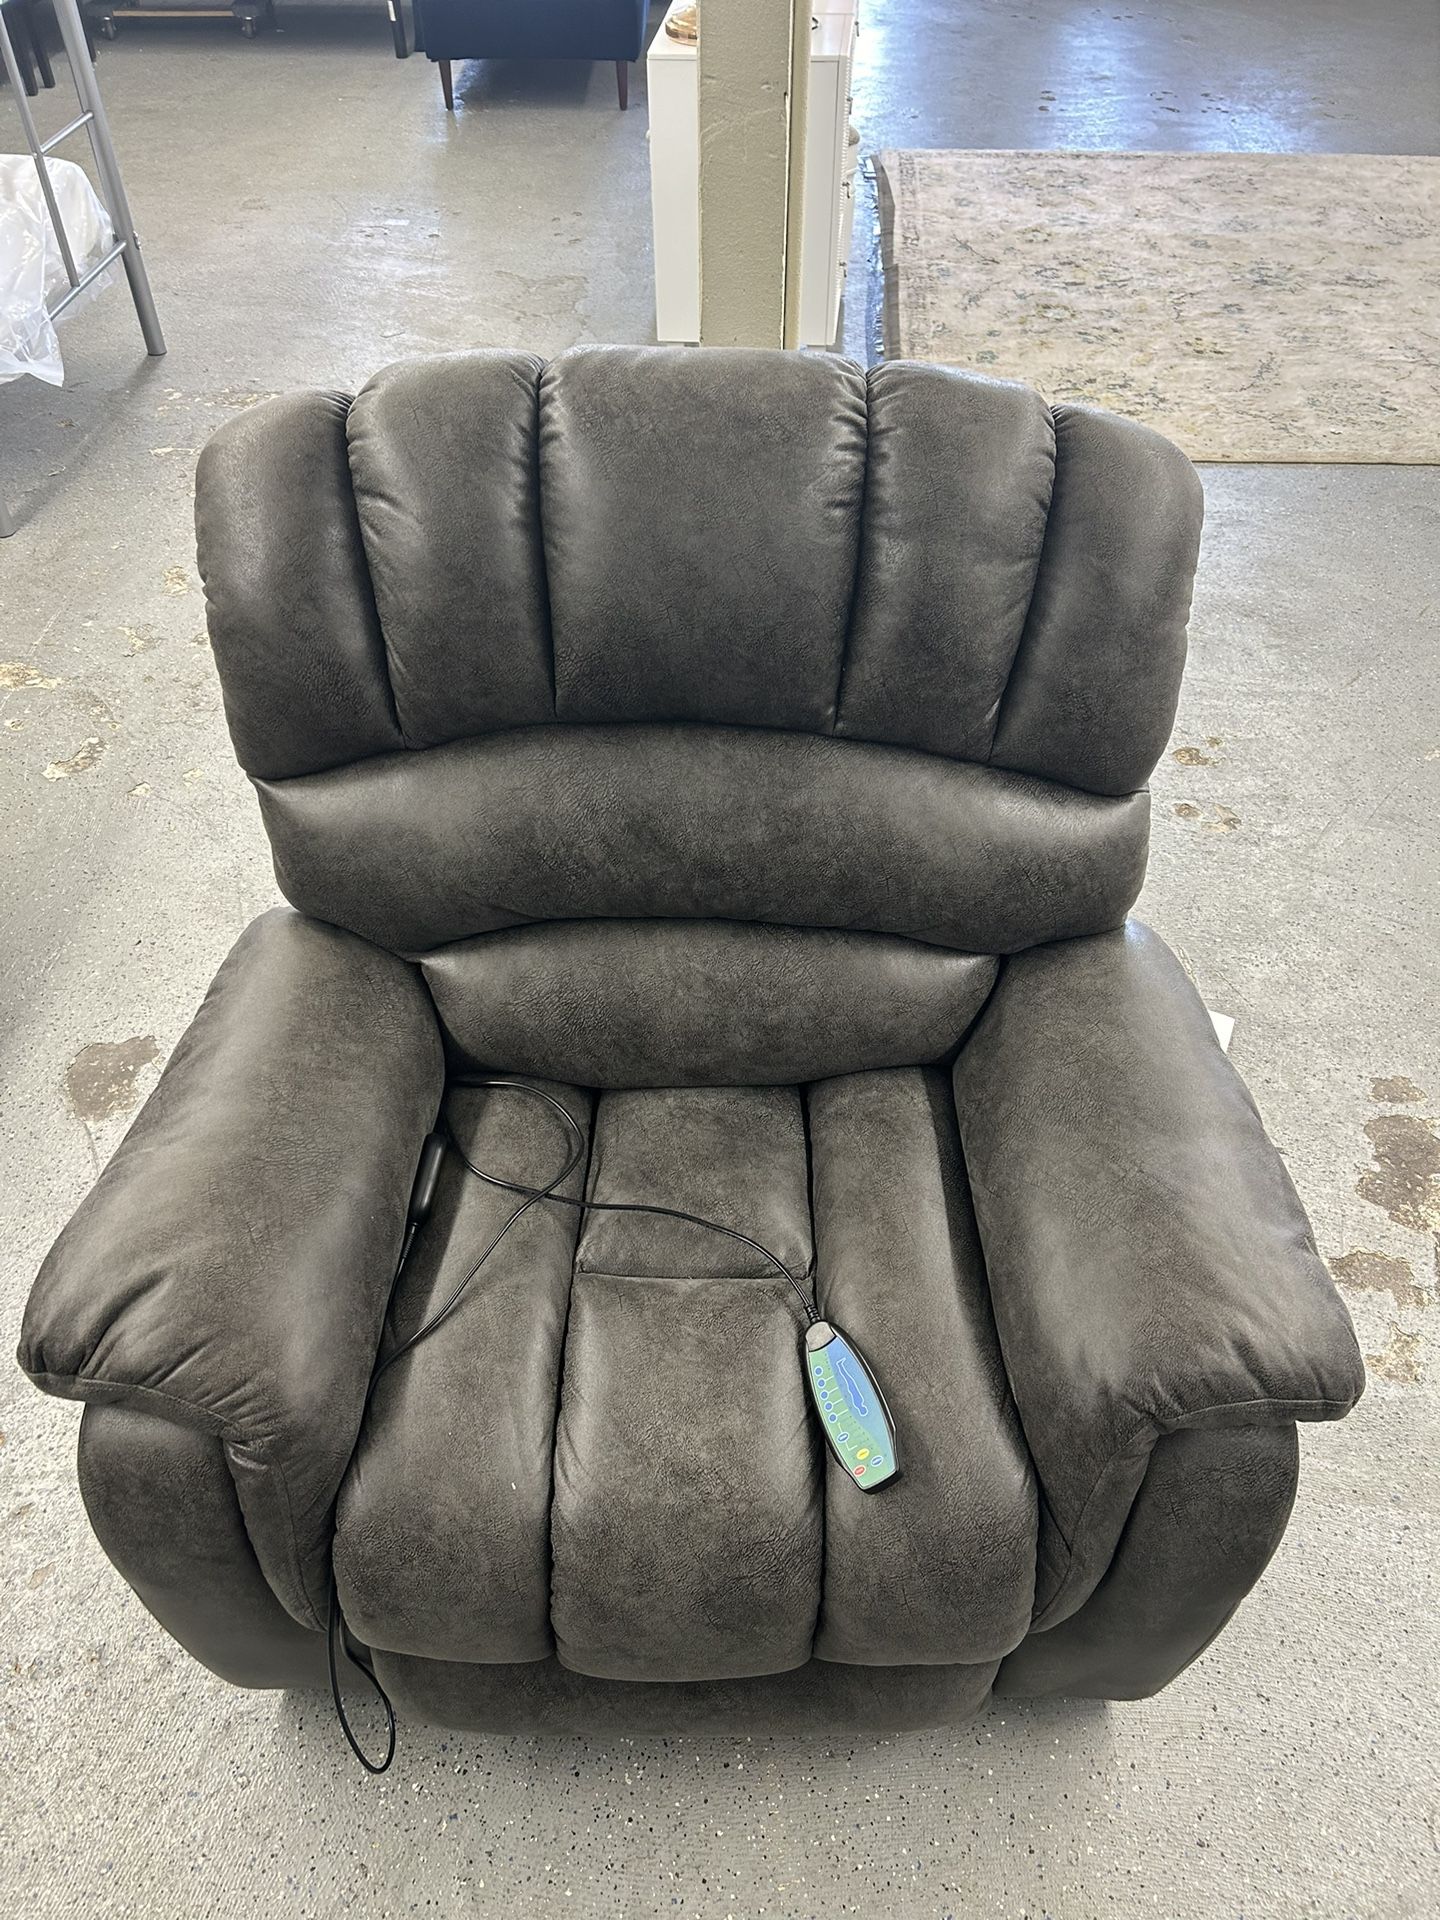 Recliner With Massage Feature